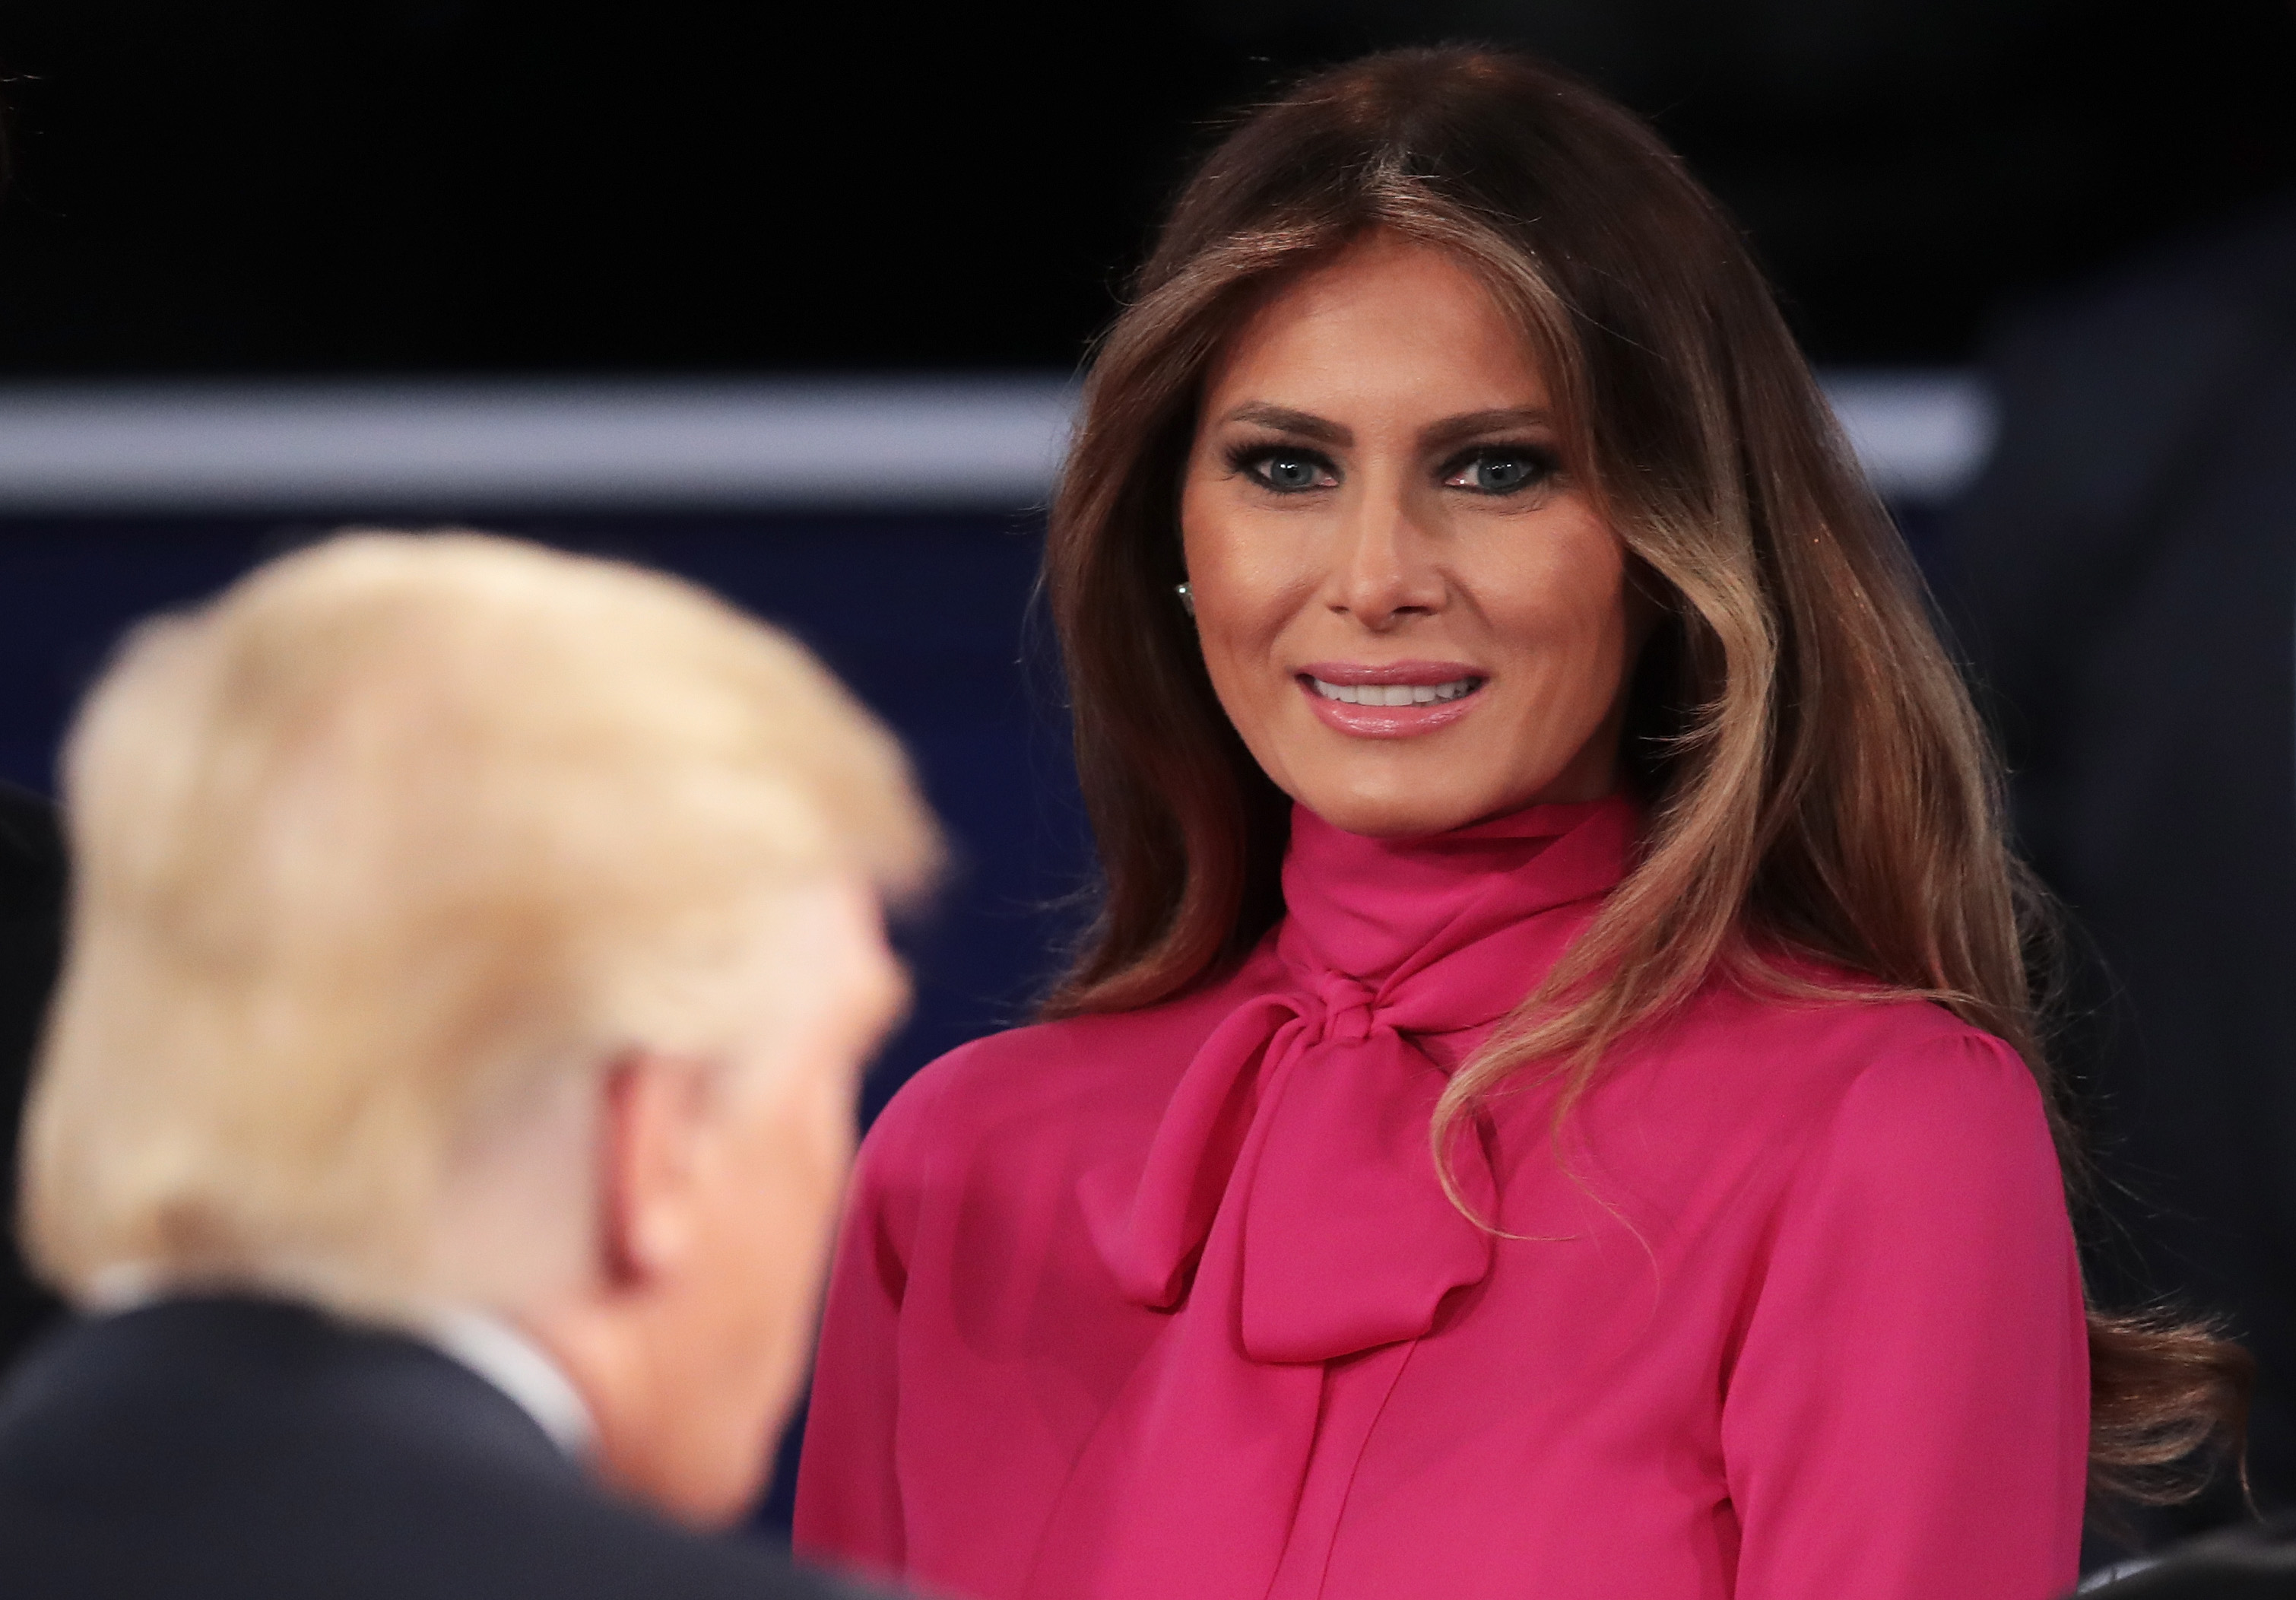 Melania Trump greets her husband Republican presidential nominee Donald Trump after the town hall debate at Washington University on Oct. 9, 2016 in St Louis, Missouri. (Scott Olson—Getty Images)